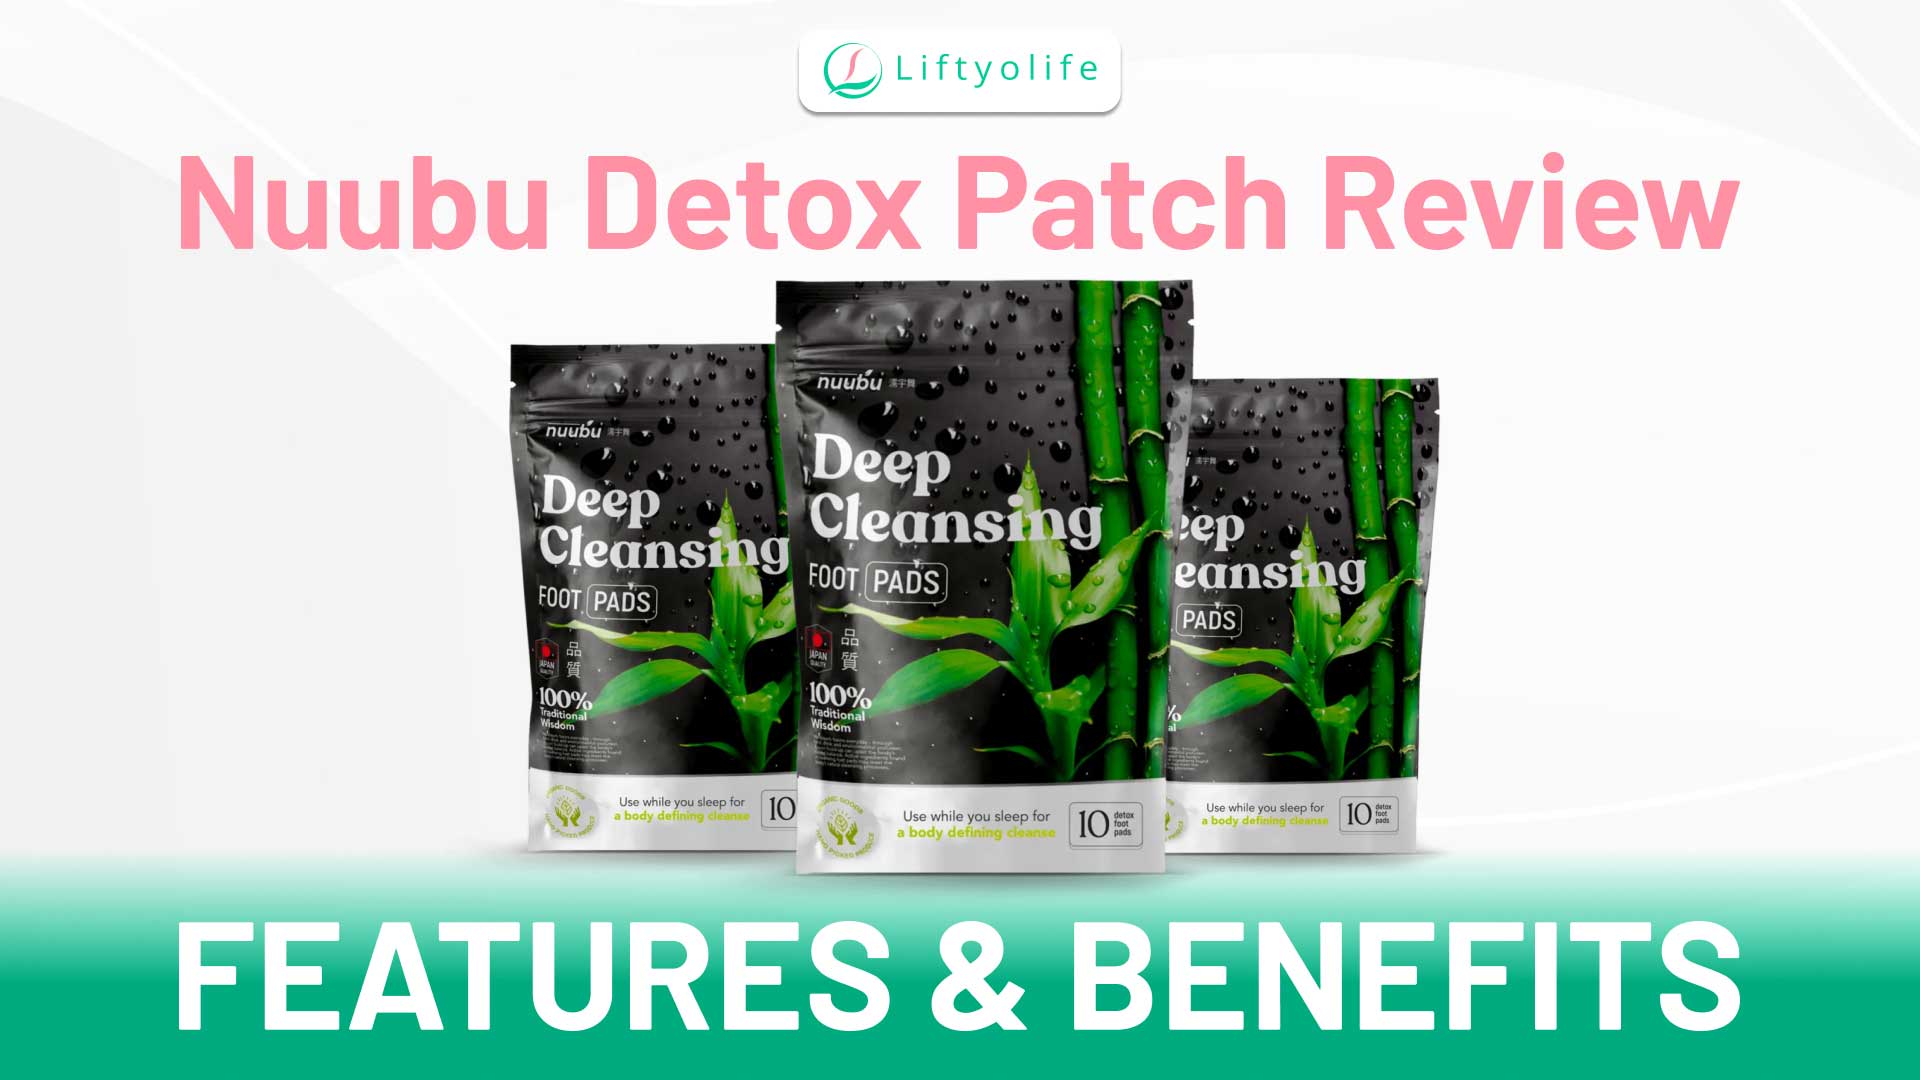 Nuubu Detox Patch Review: Features & Benefits